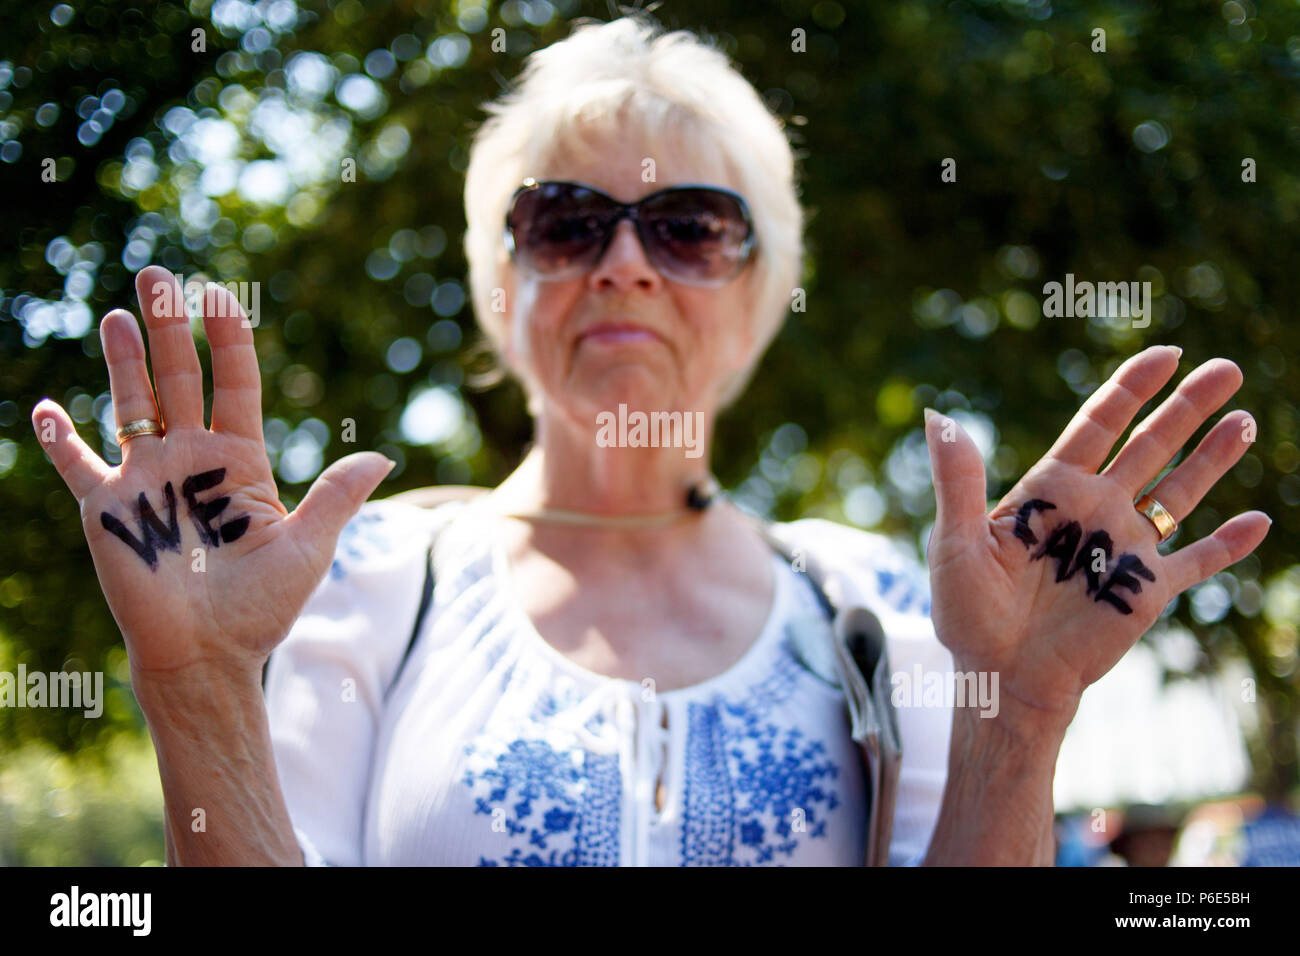 Washington, DC, USA. 30th June, 2018. Protestors gather in Lafayette Park, across from the White House, for the Families Belong Together rally. Credit: Michael Candelori/ZUMA Wire/Alamy Live News Stock Photo